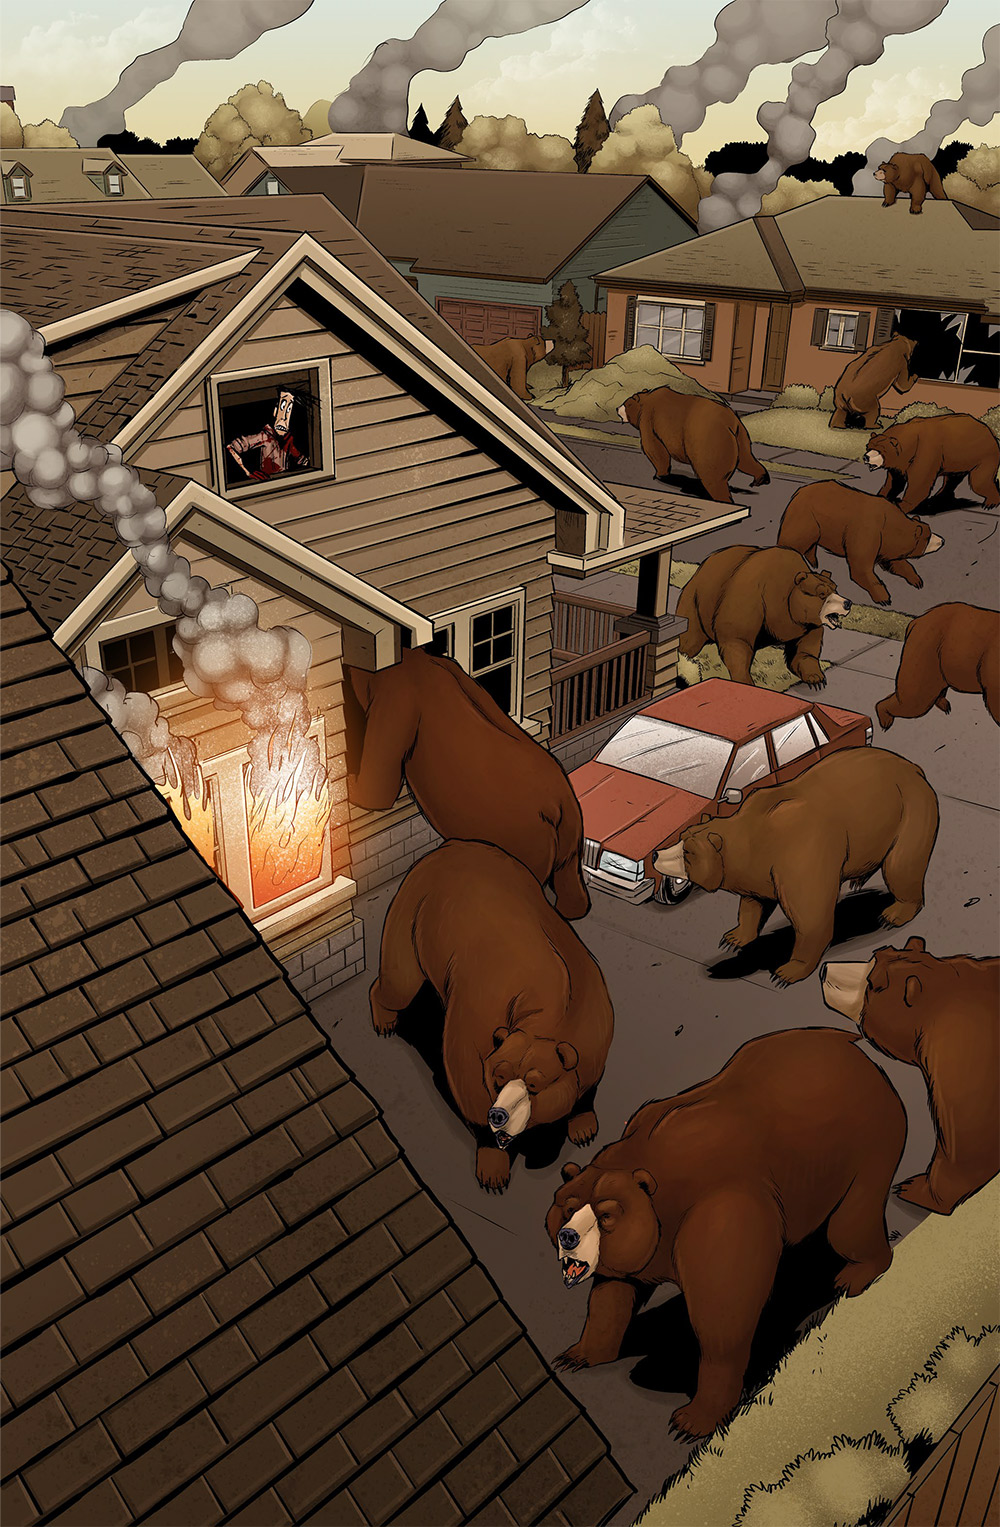 I want to make a side scrolling brawler called Streets of Bears where you walk around and fight bears with your fists.